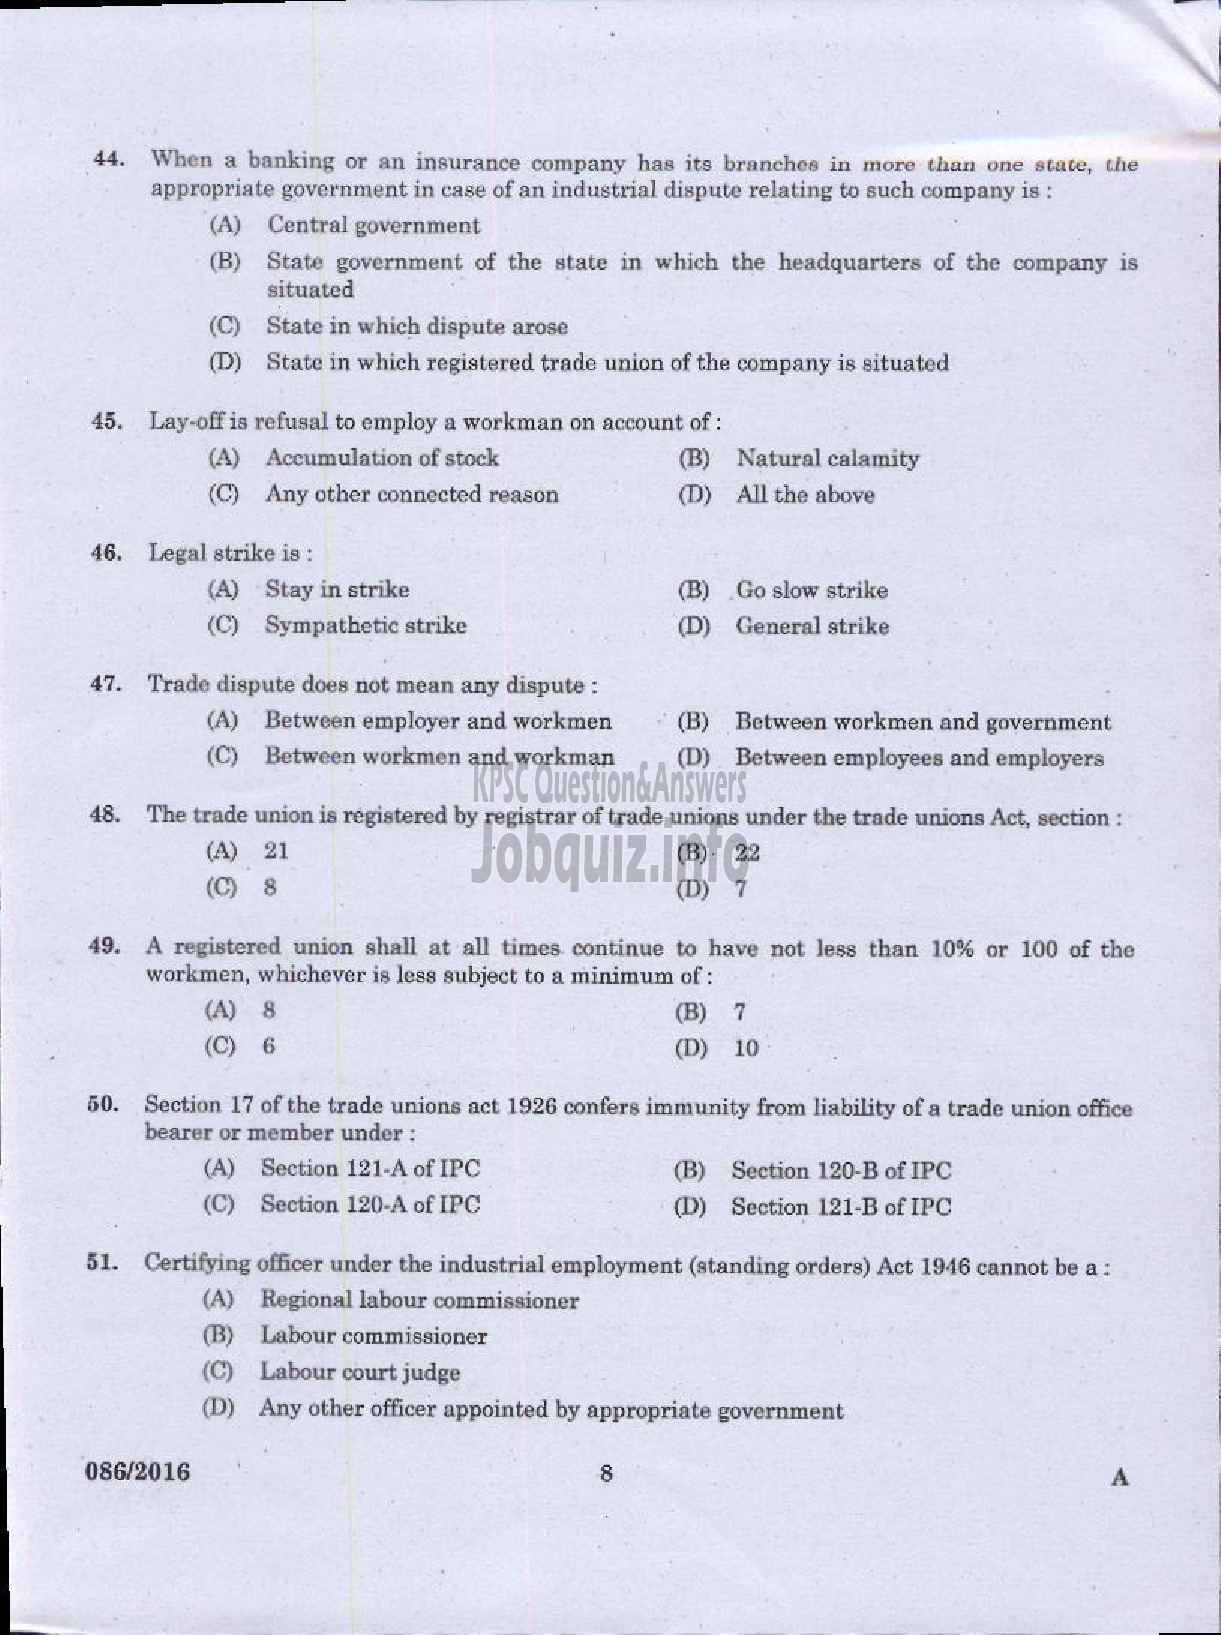 Kerala PSC Question Paper - PERSONNEL MANAGER KERALA STATE COIR CORPORATION LIMITED-6